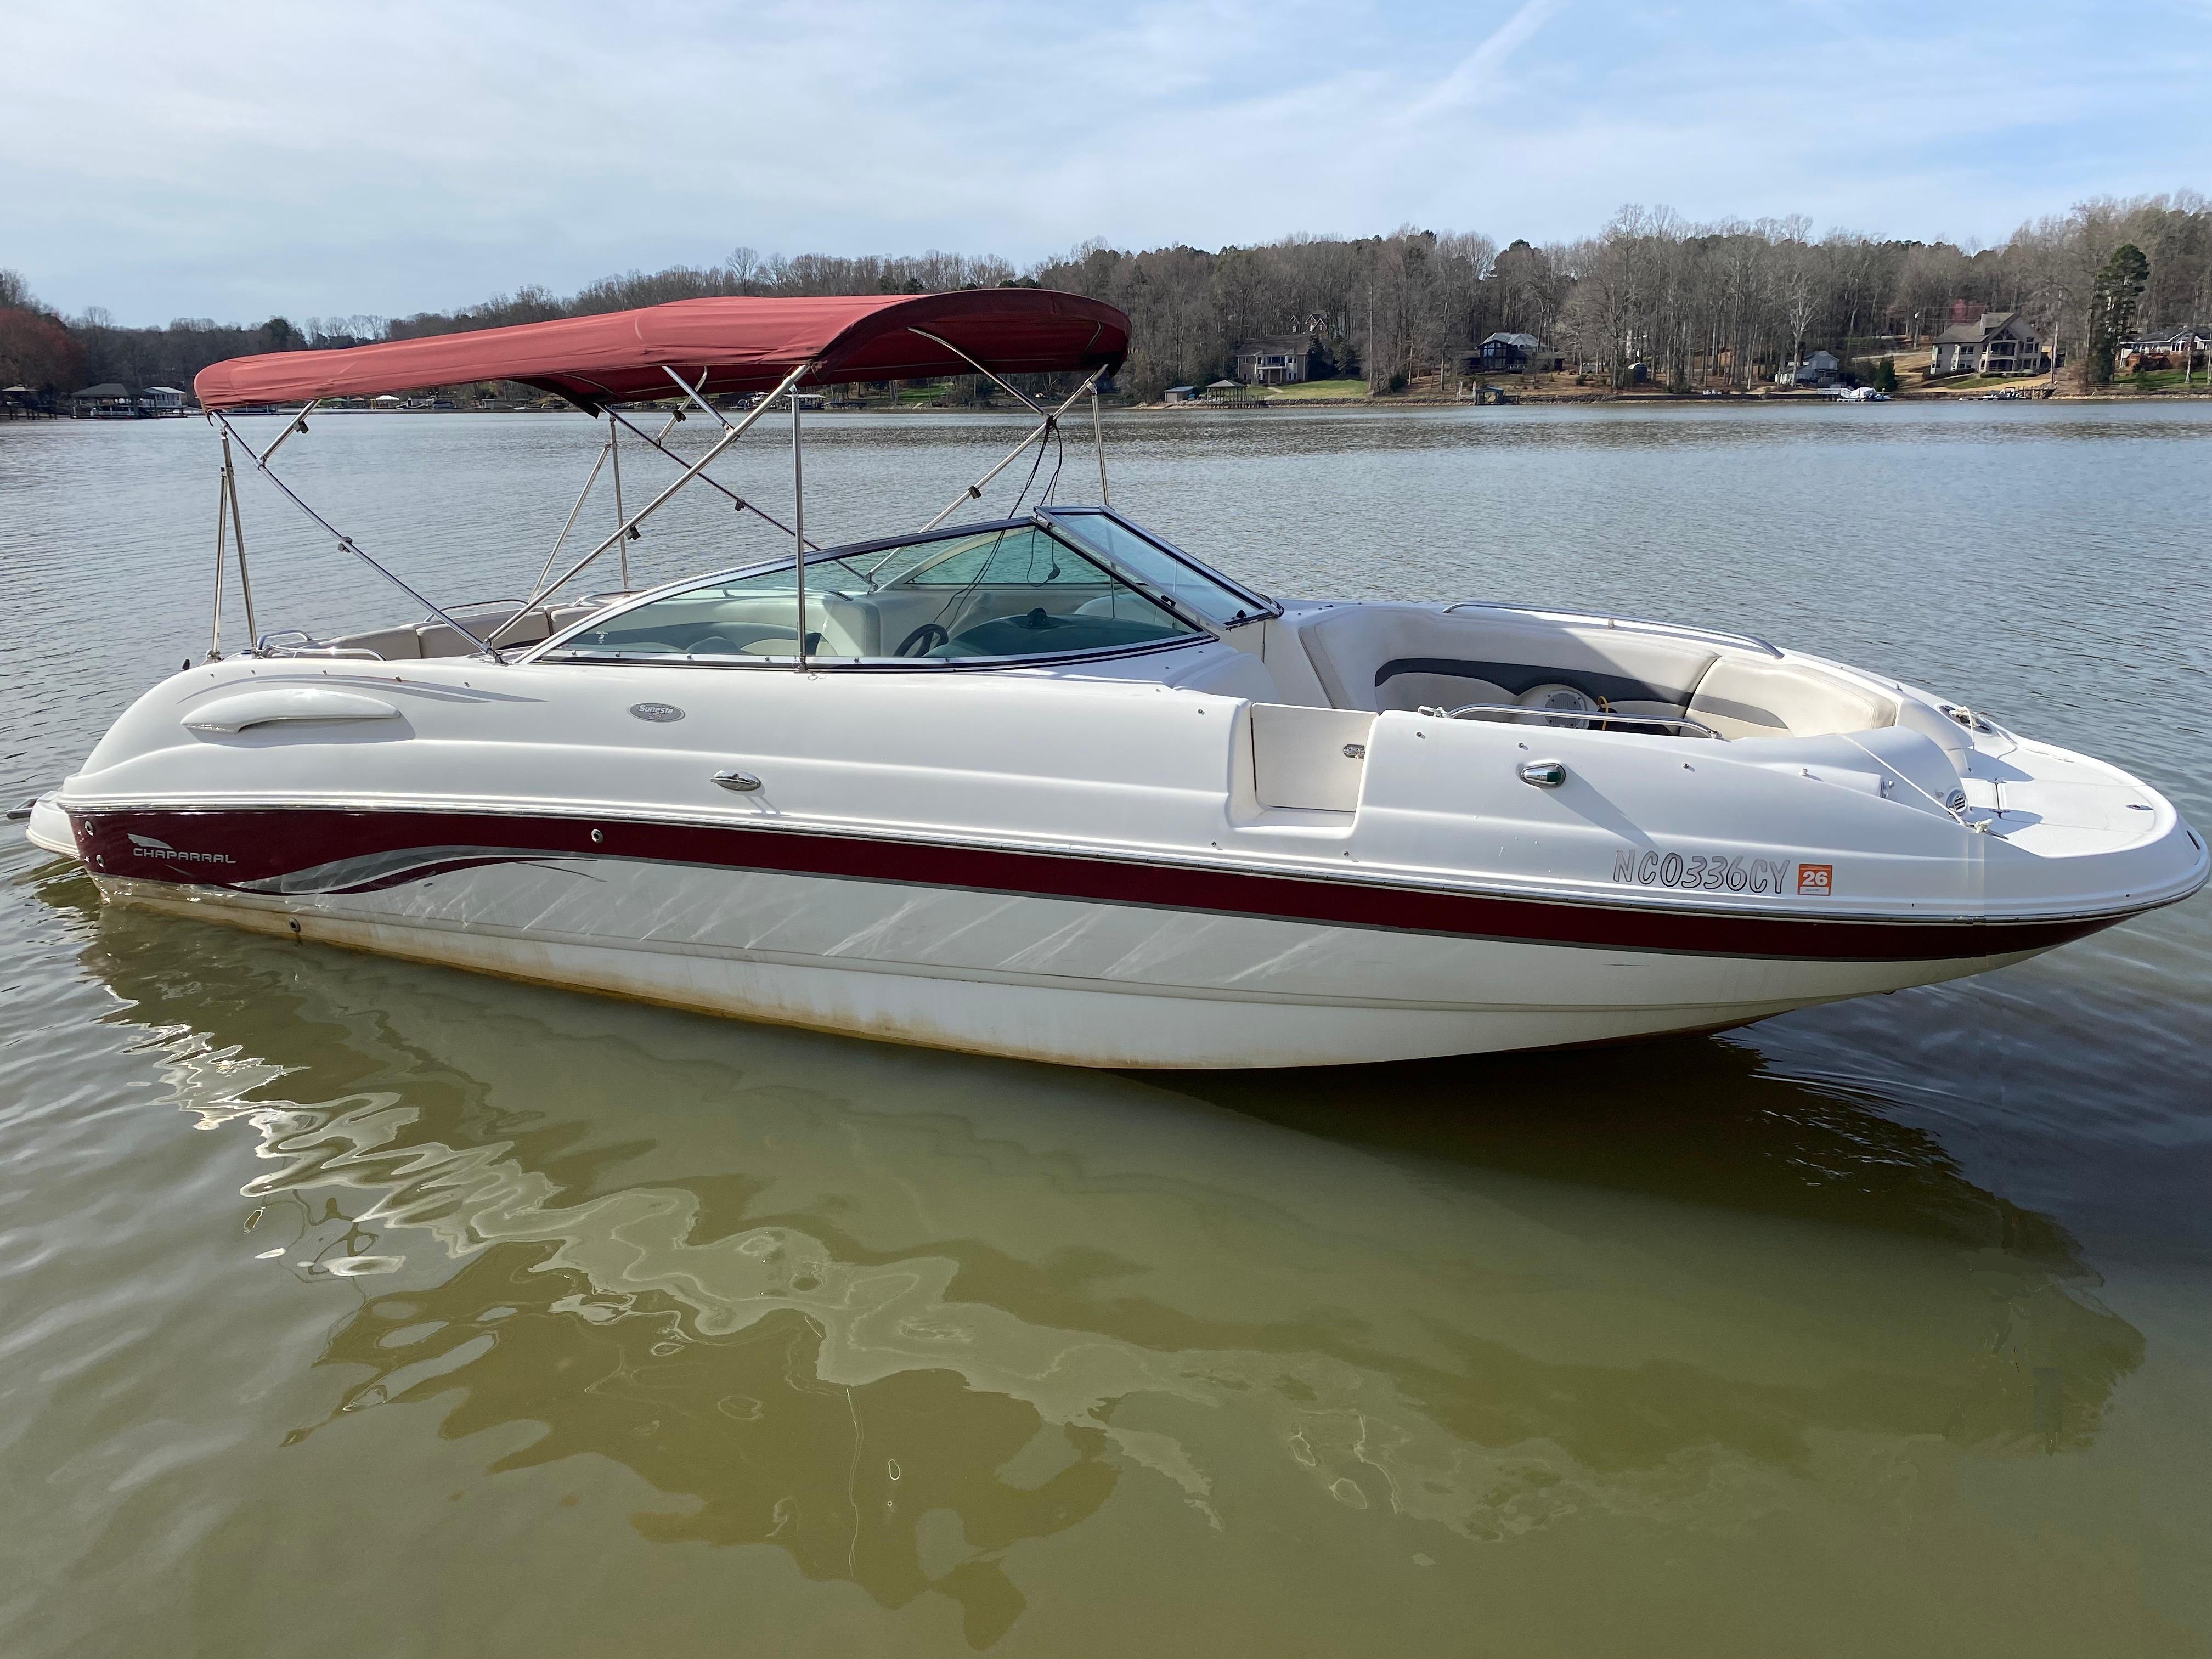 Used 2004 Chaparral Sunesta 274, 28117 Mooresville, NC - Boat Trader